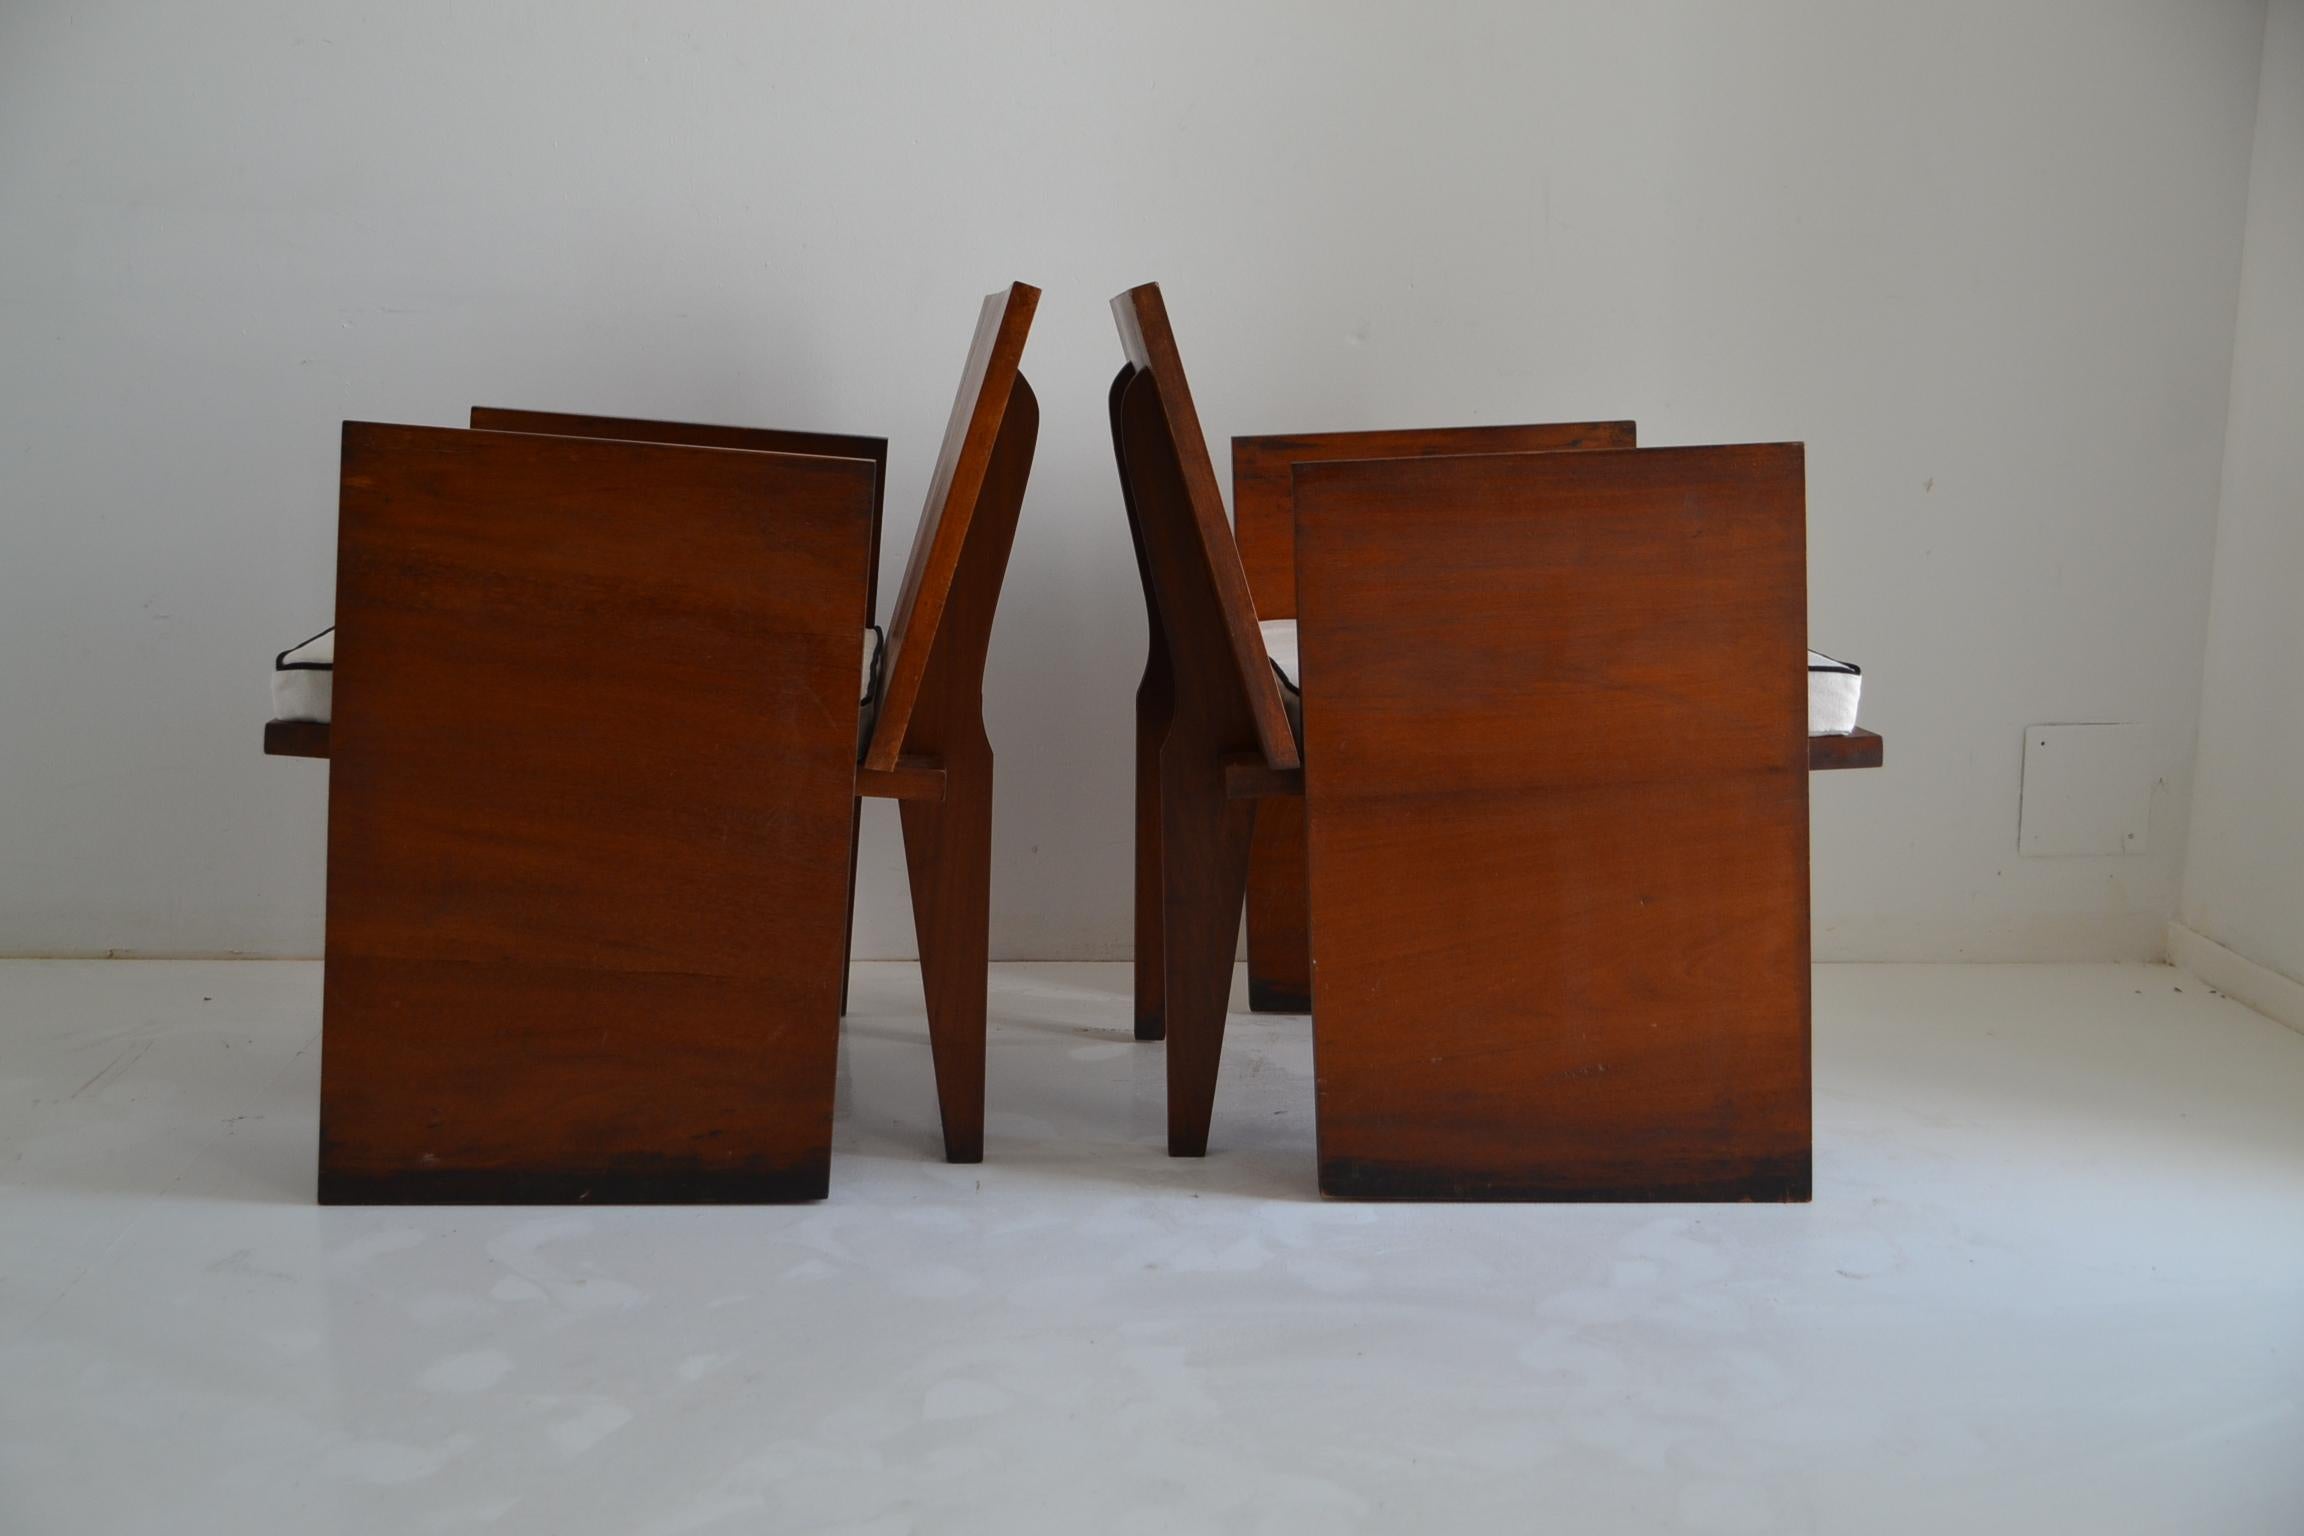 French Pair of Brutalist Mahogany Chairs, Modernism